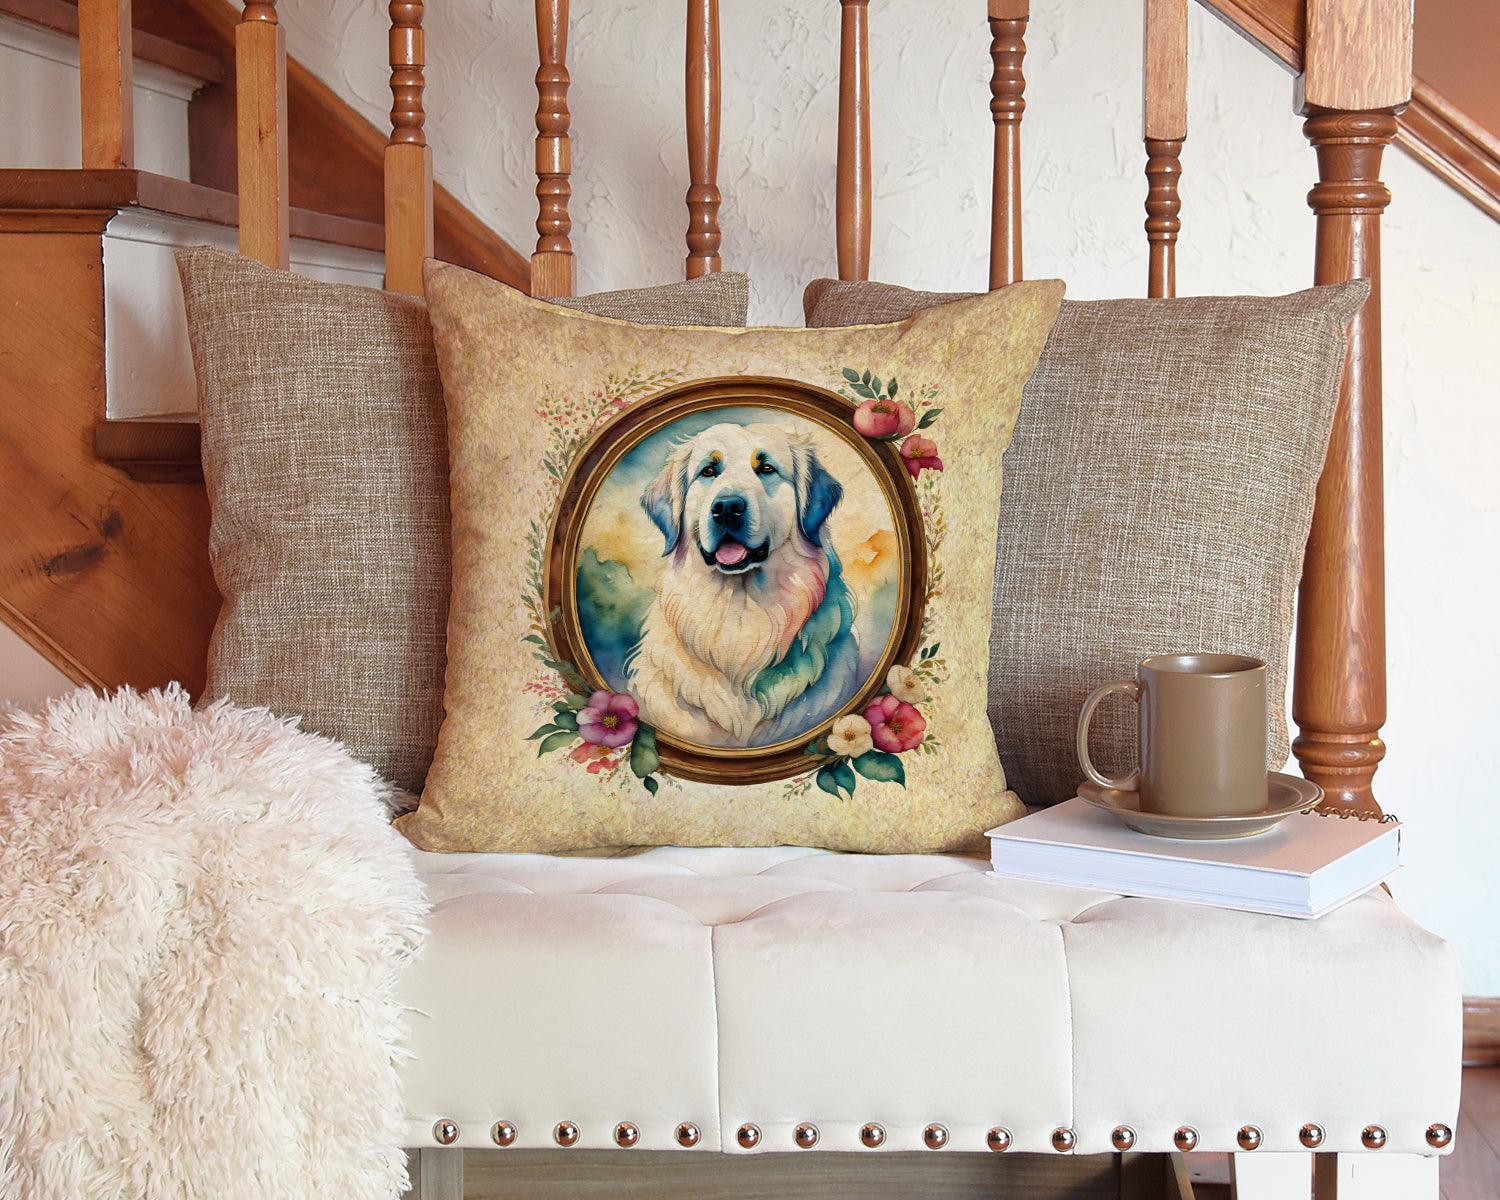 Great Pyrenees and Flowers Fabric Decorative Pillow